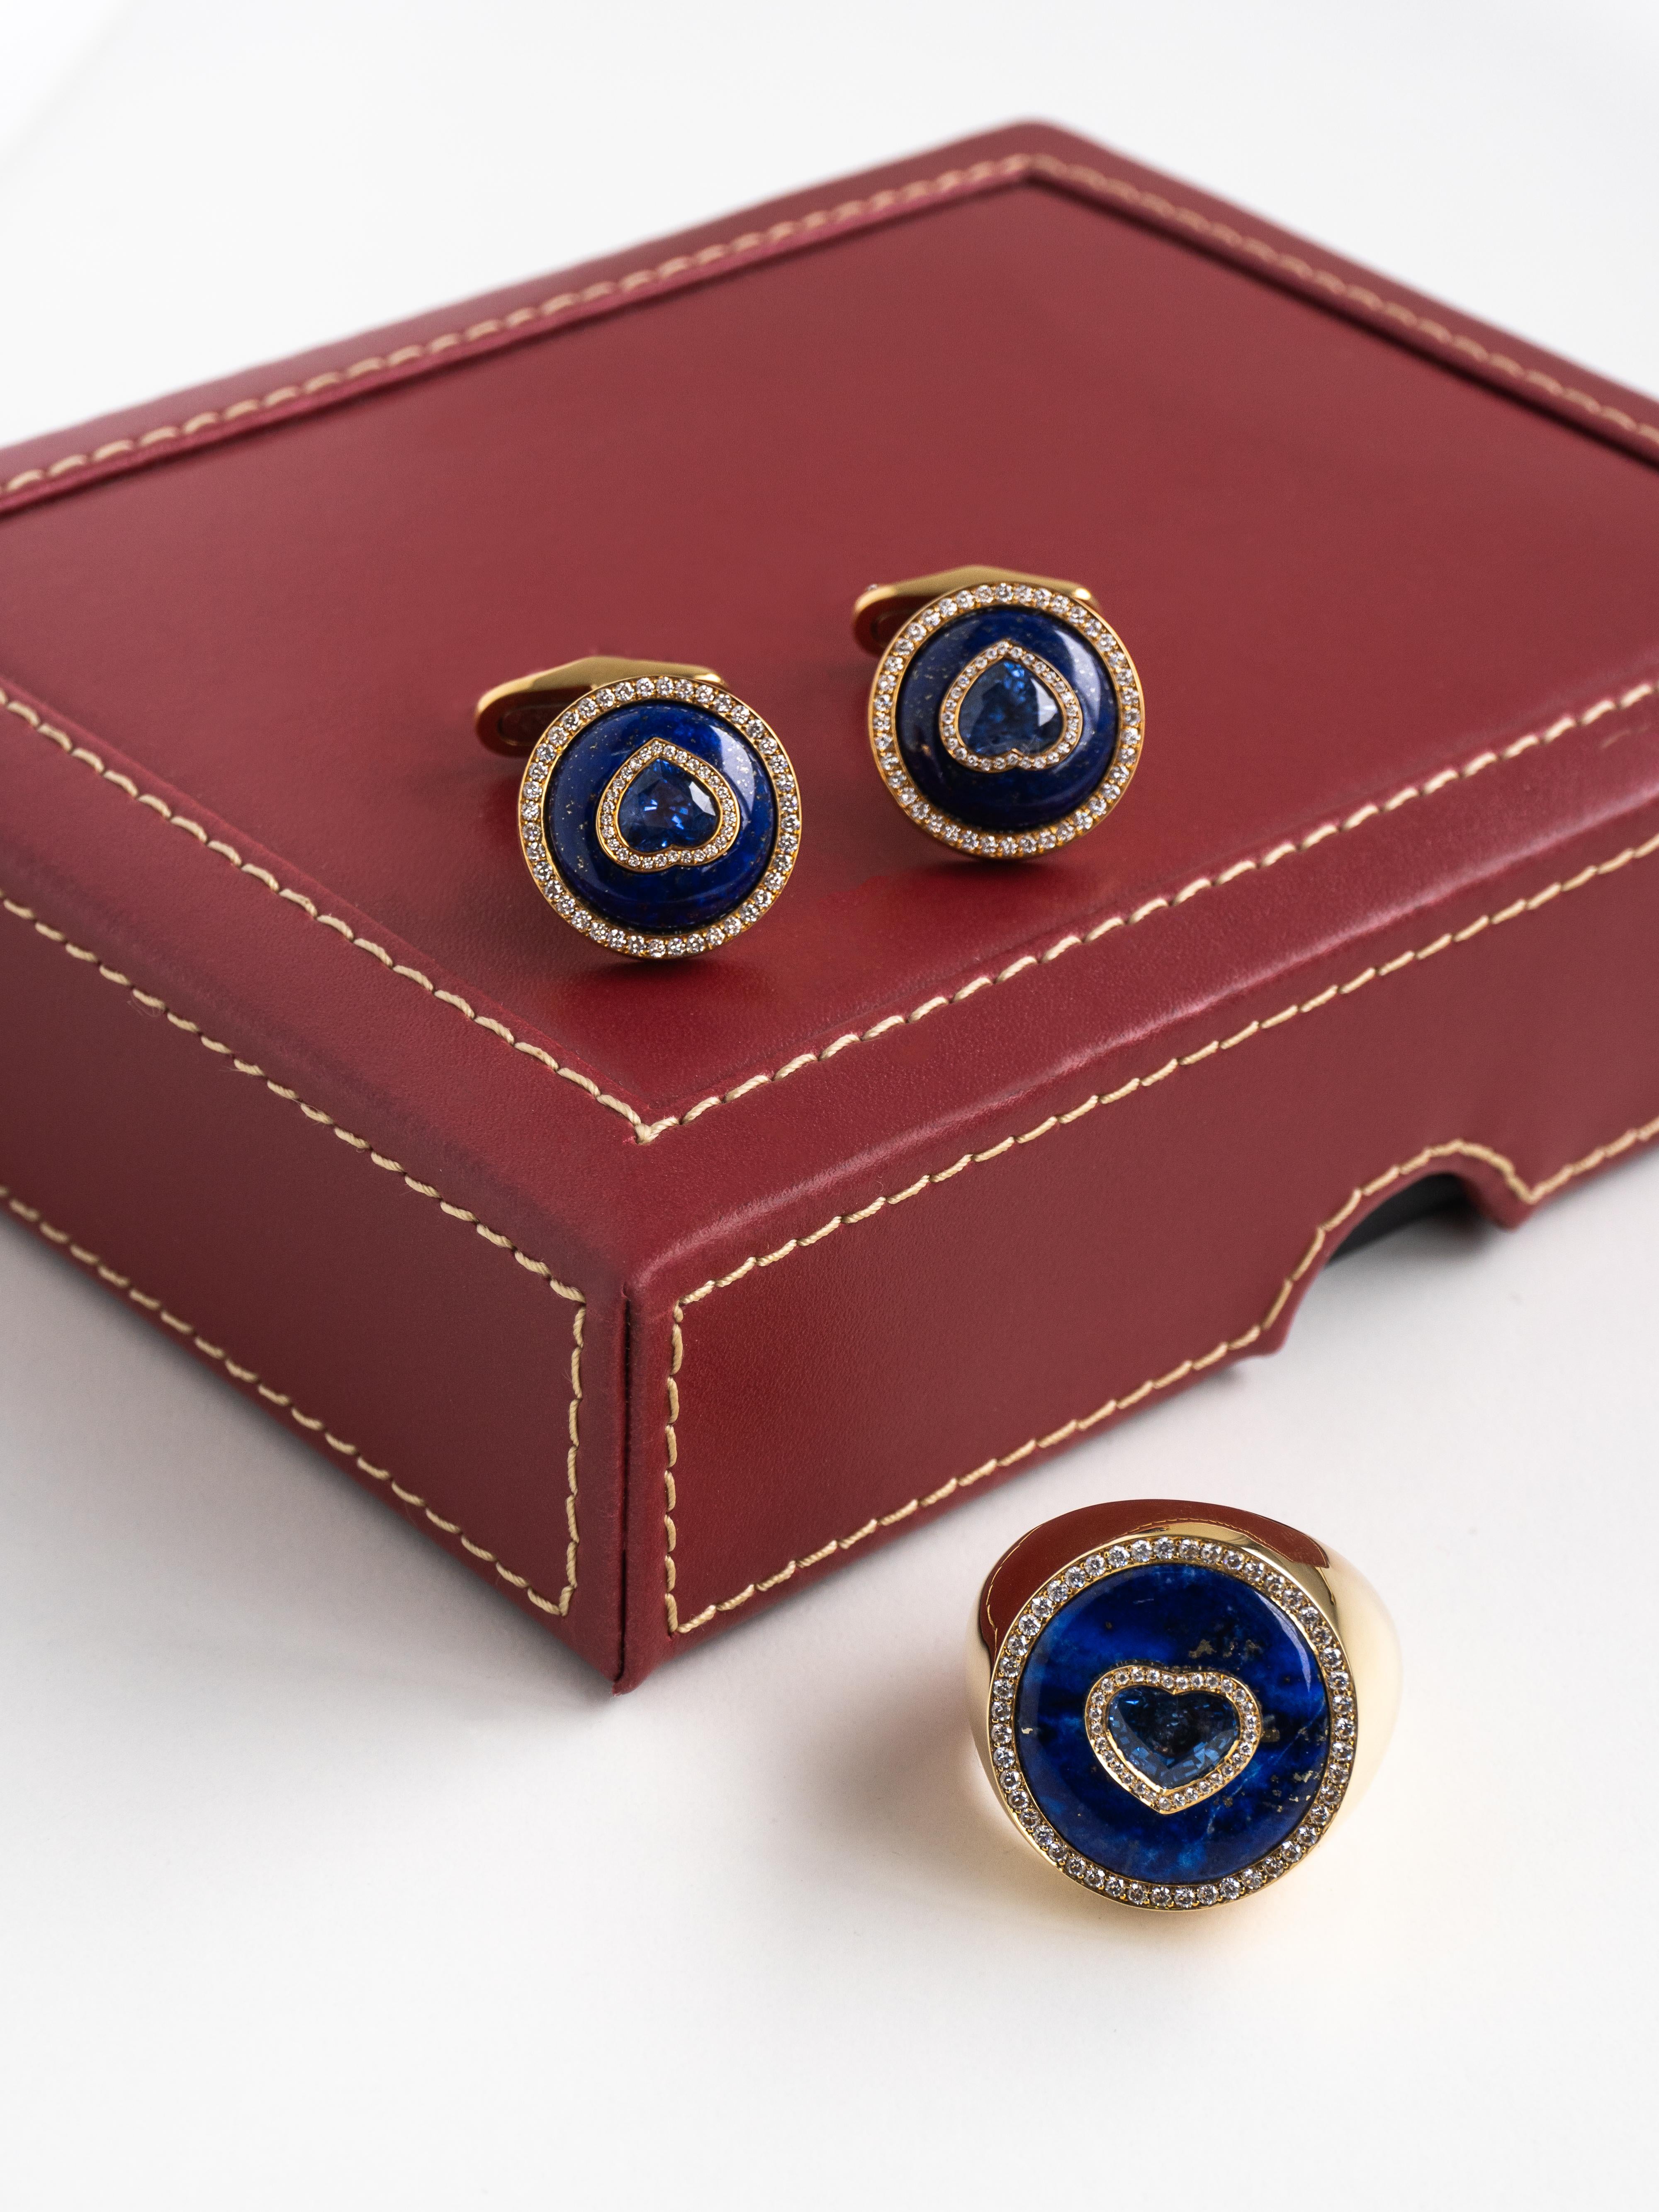 Men's 2.98 Carats Heart Shape Blue Sapphire, Lapis and Diamond Cufflinks in 18k Gold  For Sale